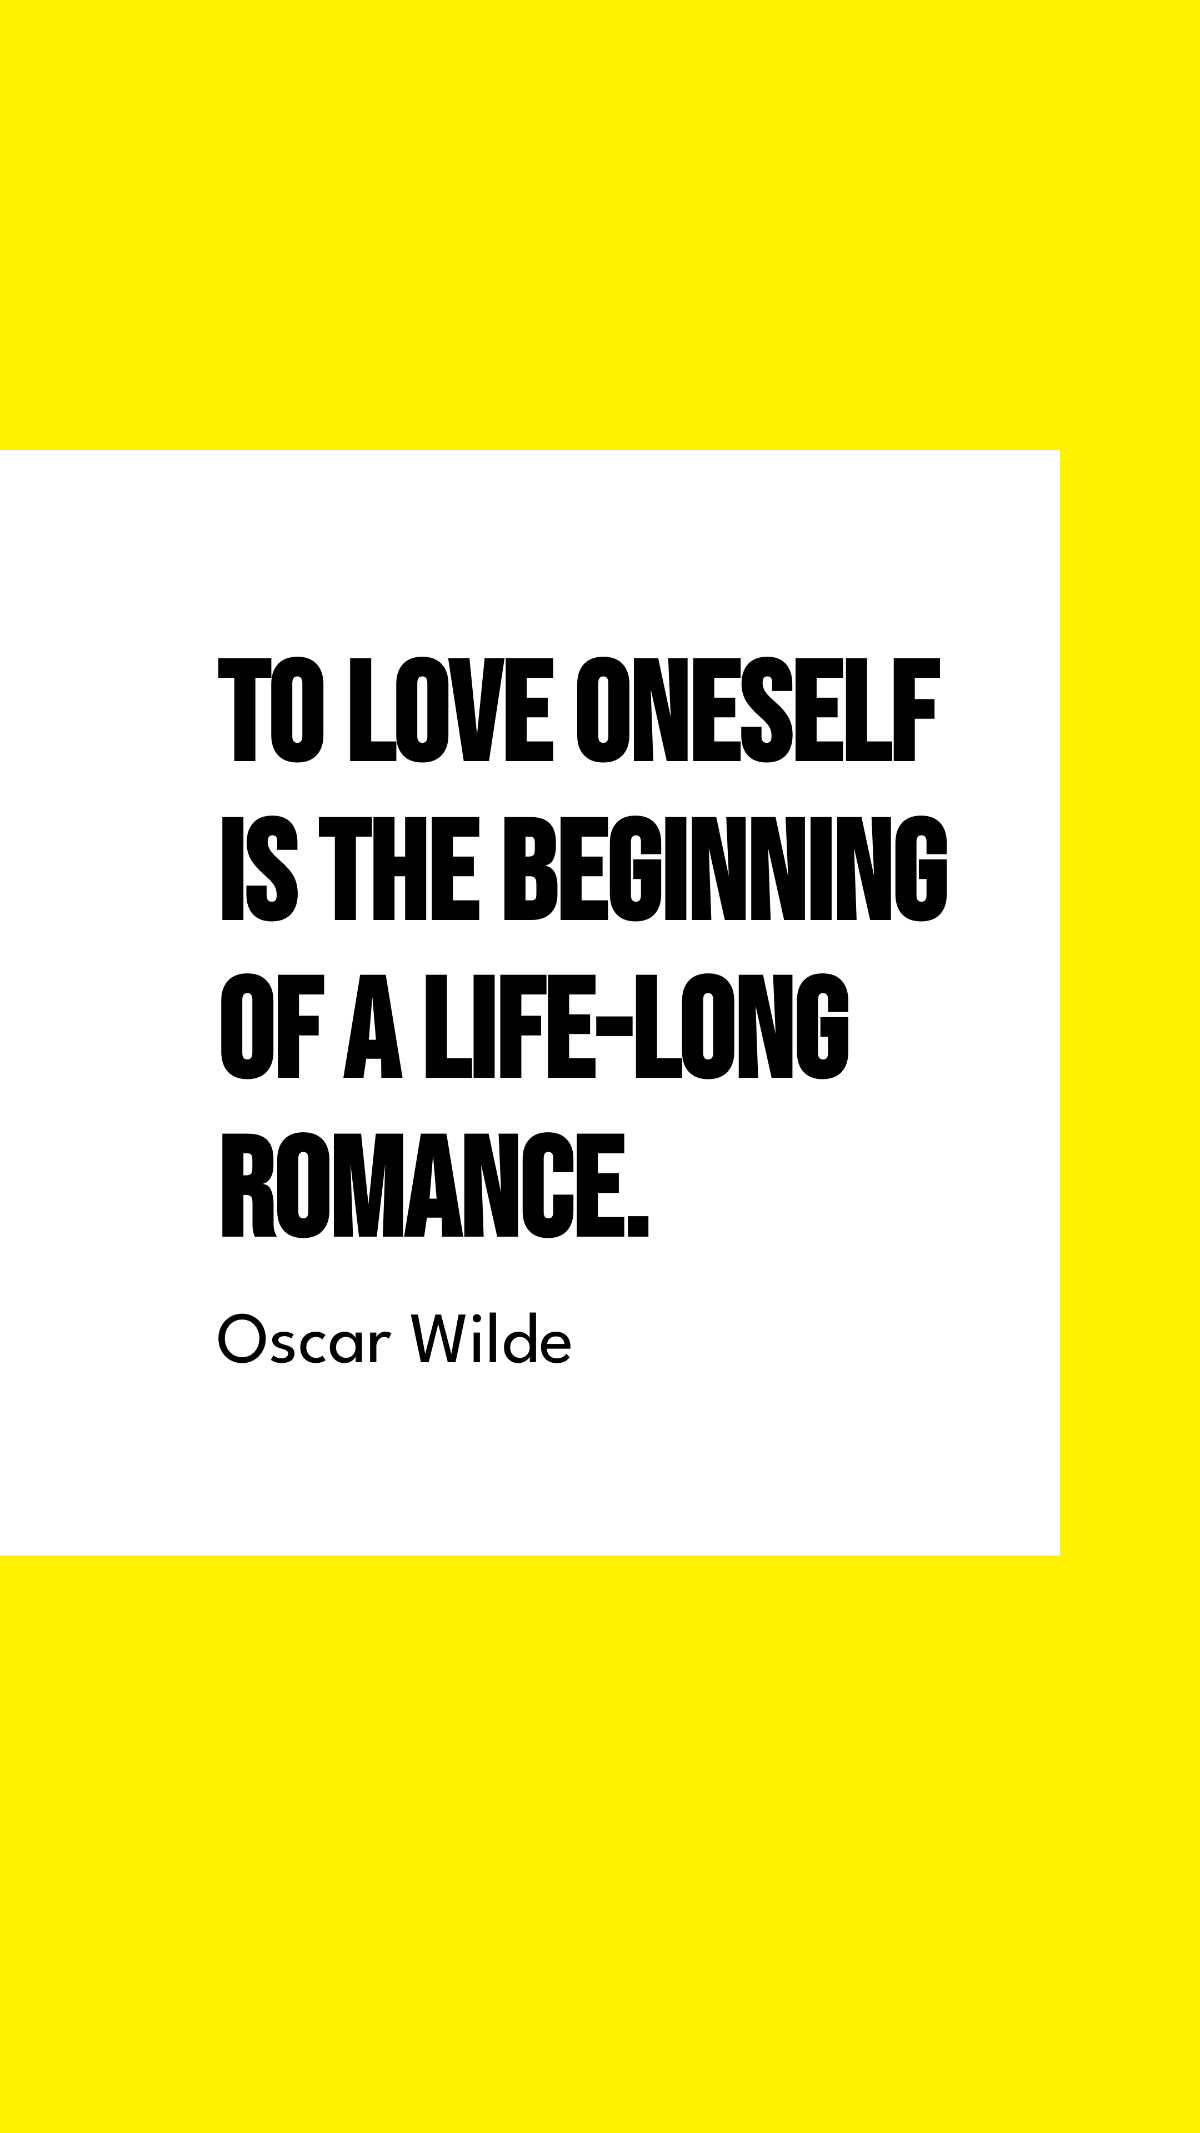 Oscar Wilde - To love oneself is the beginning of a life-long romance. Template